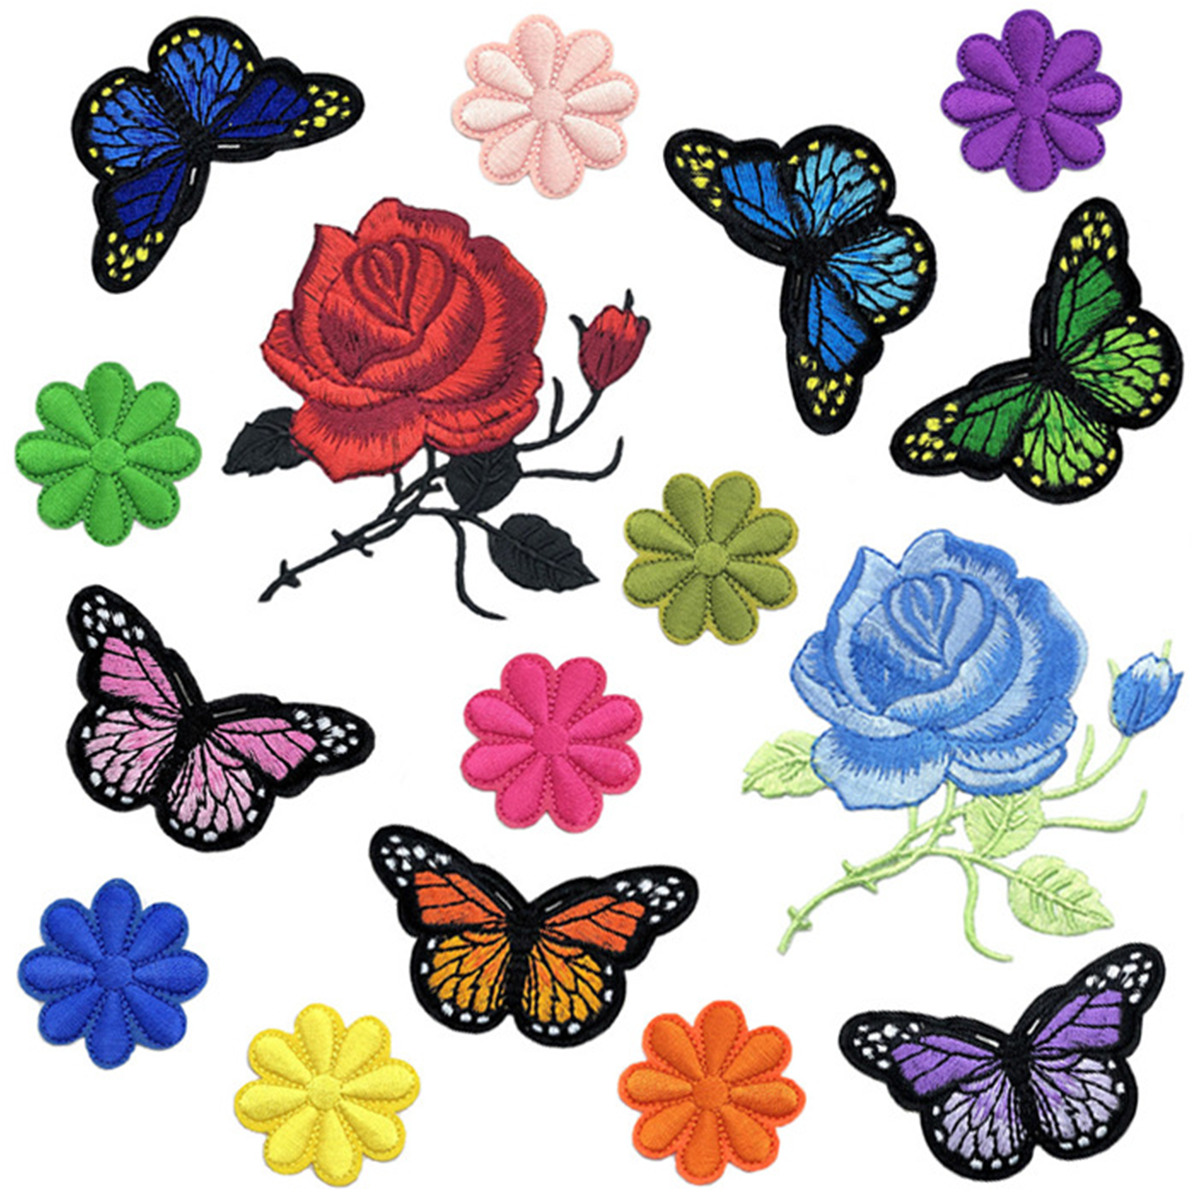 16pcs Embroidery Applique Patches Rose Flowers Butterfly Iron On - image 1 of 7